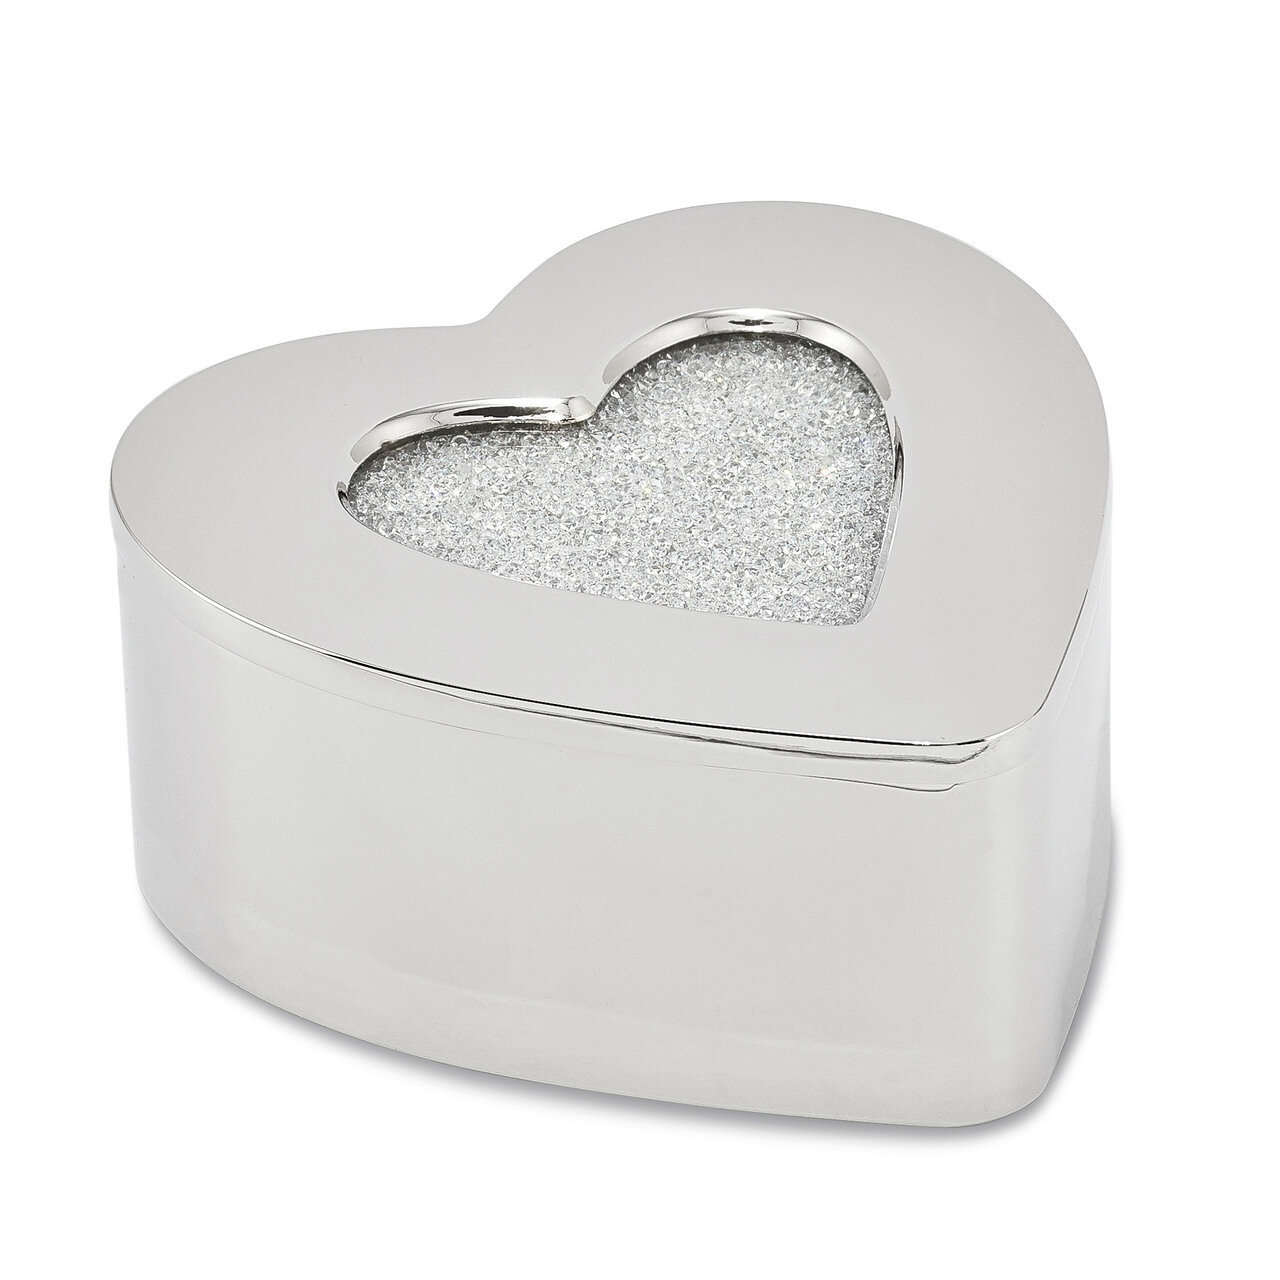 Nickel-plated Heart Lid Jewelry Box Crystal-filled by Jere